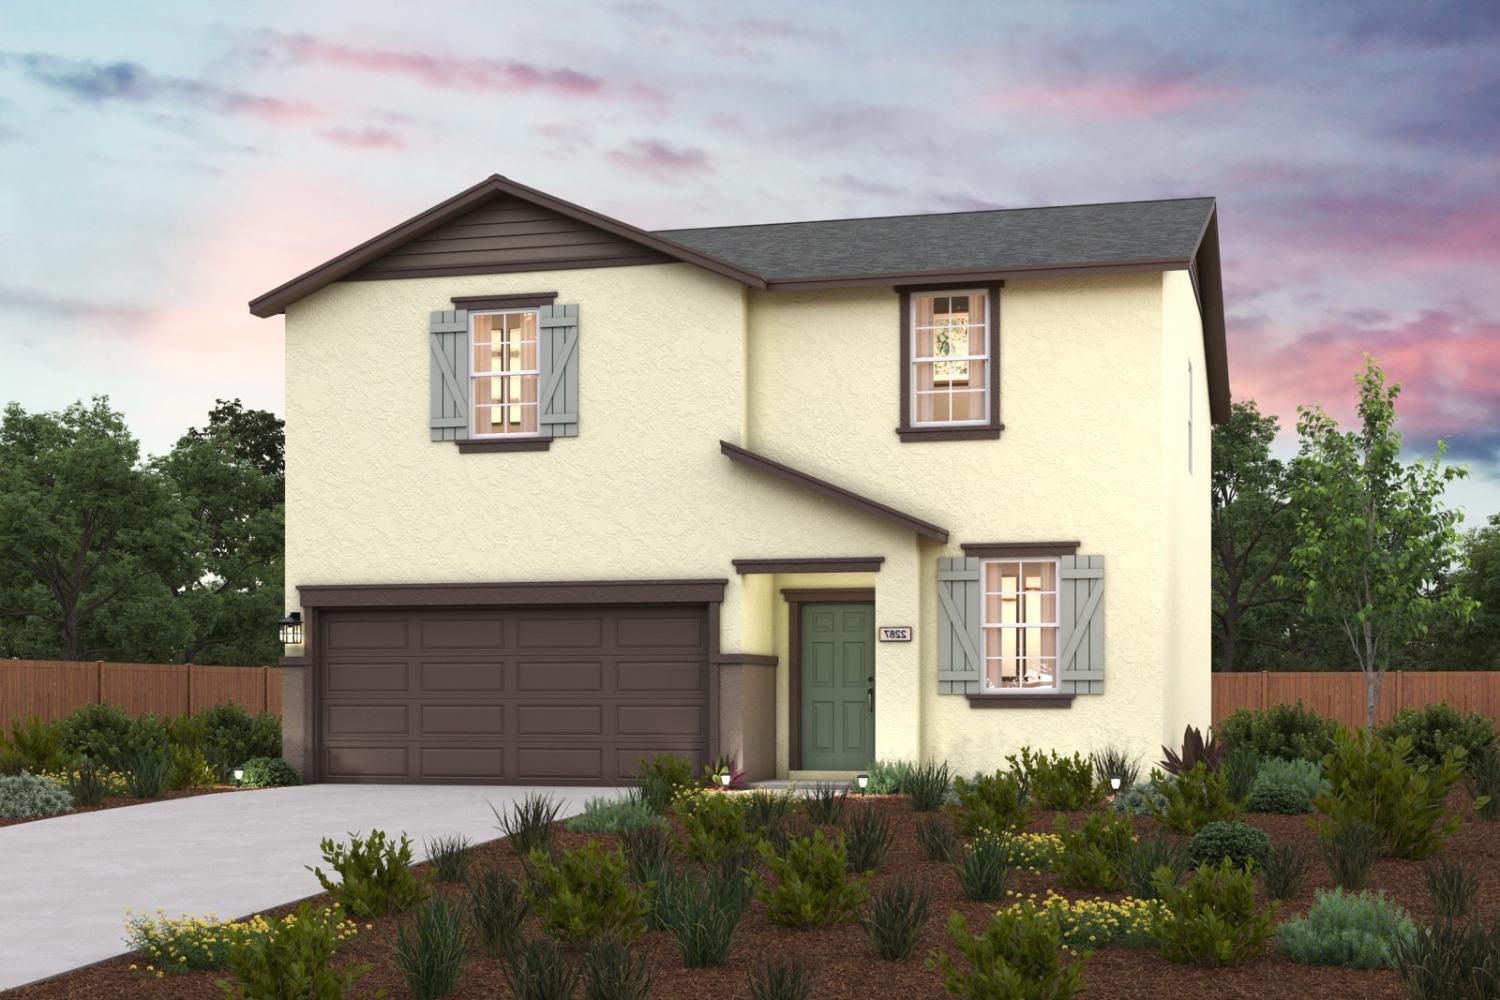 The Olive at Crest View features 2,287 square feet of living space, offering both style and comfort.